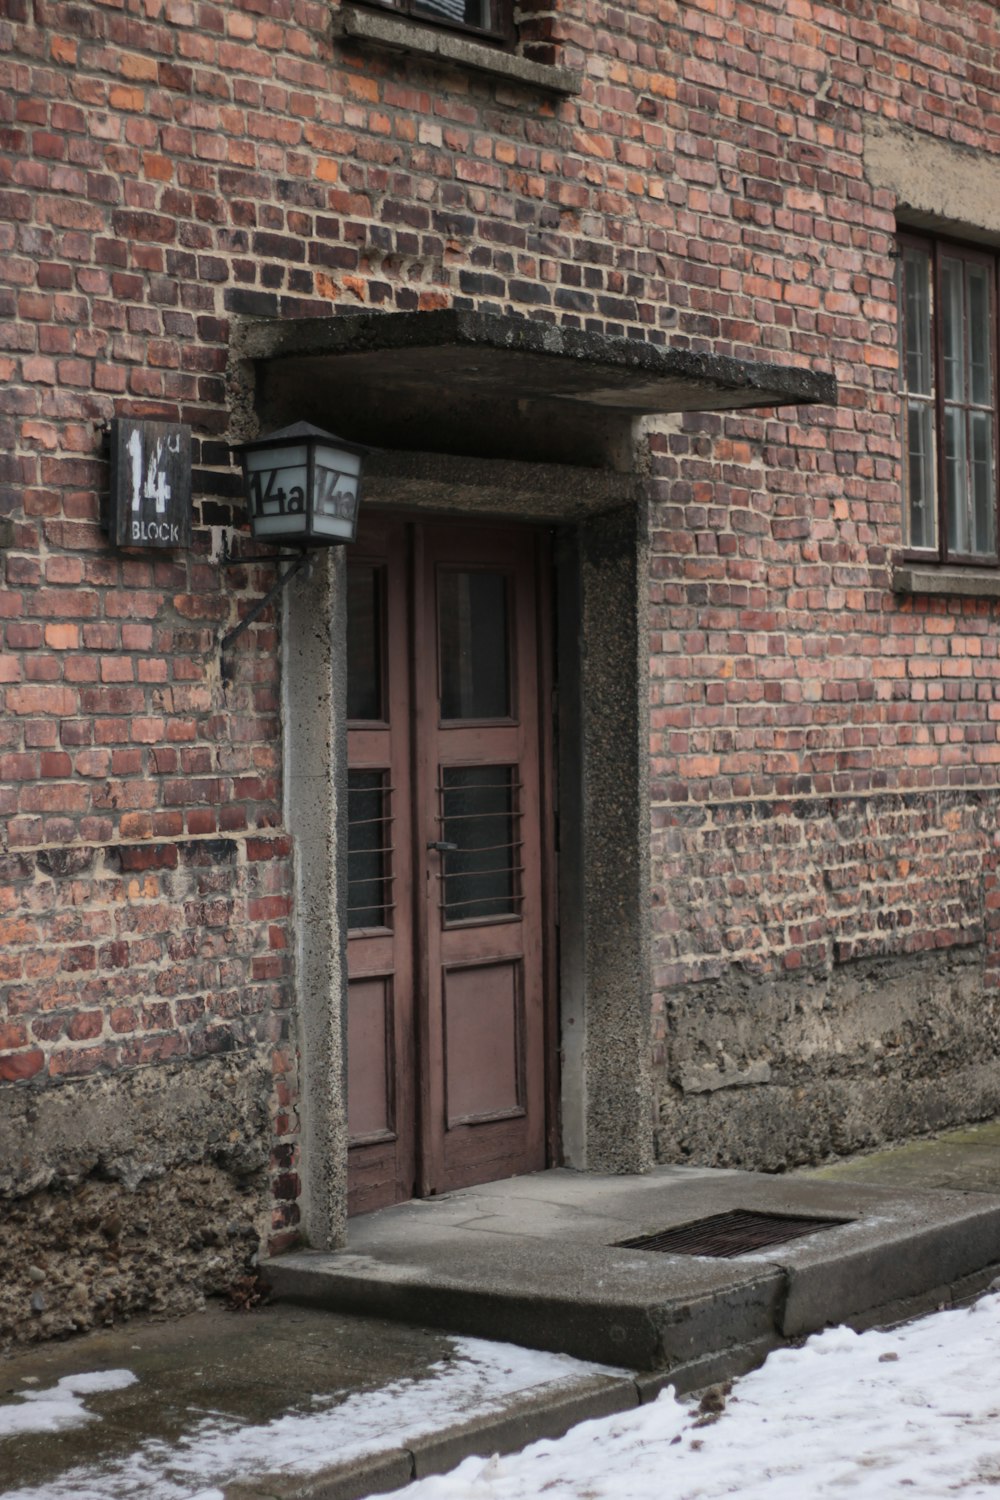 a brick building with a red door and window